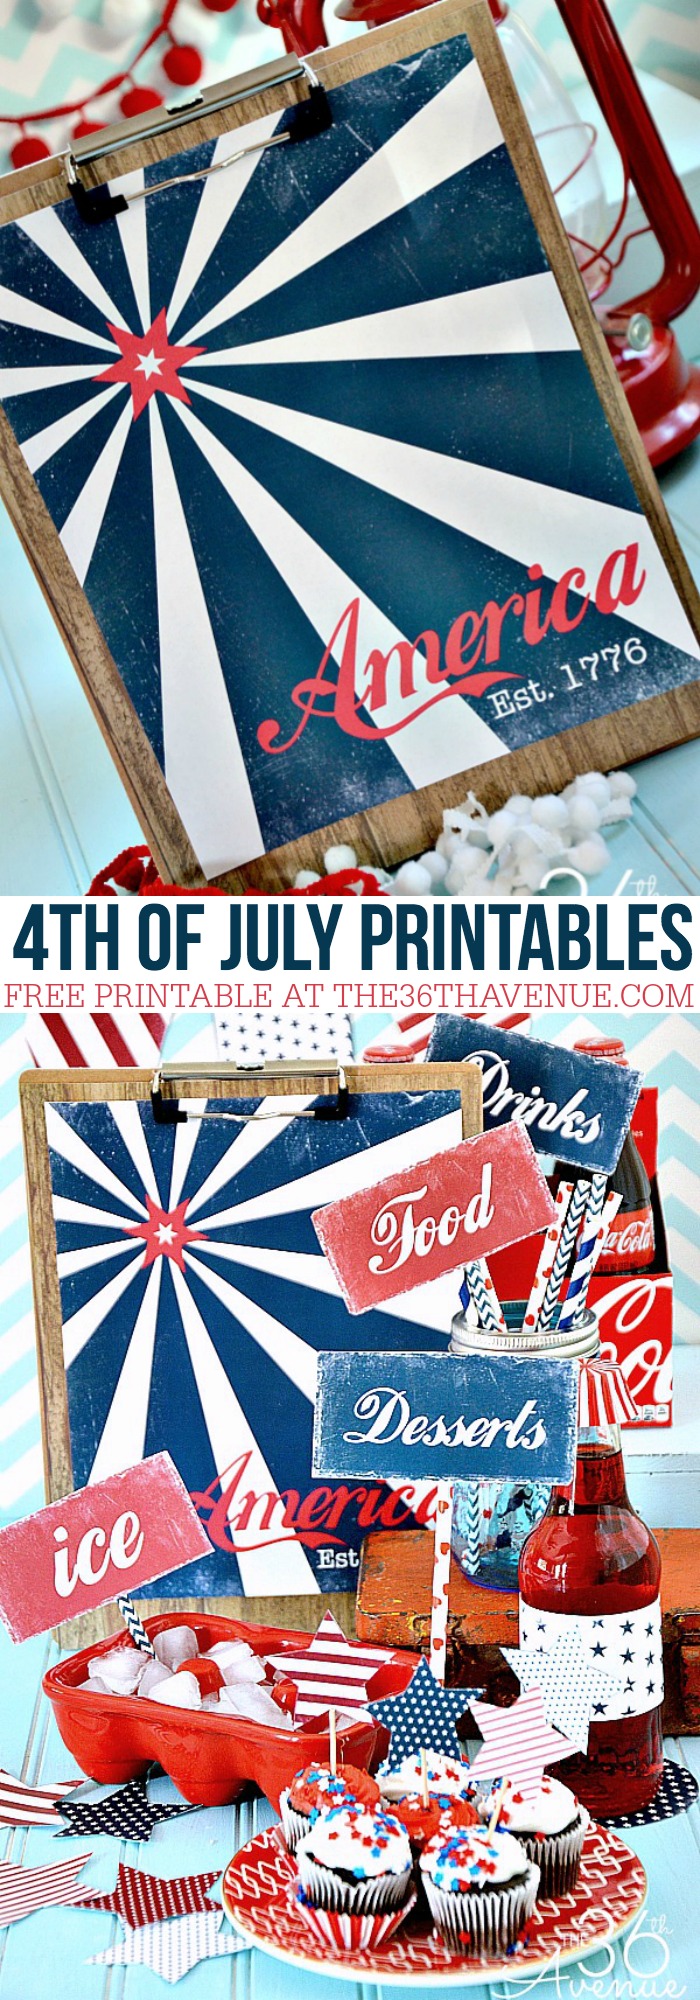 4th of July printables